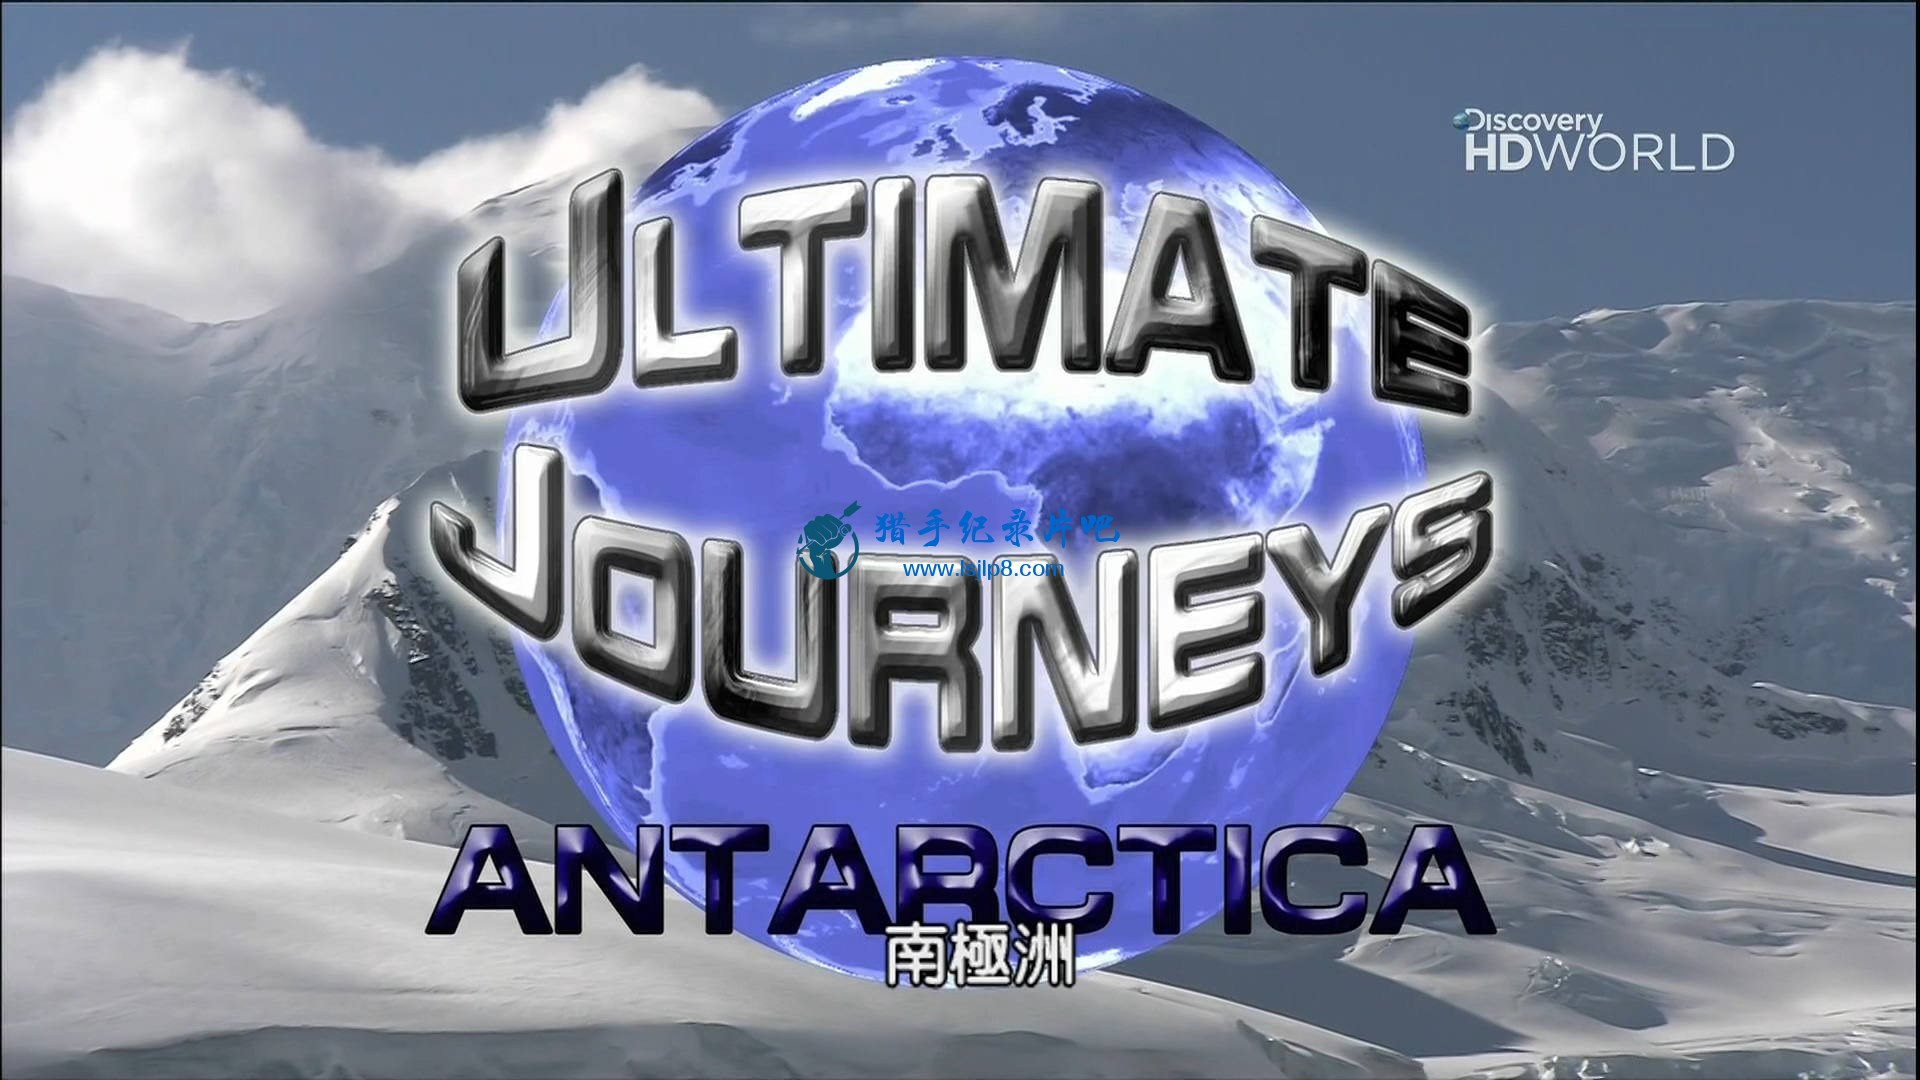 Discovery.HD.World.Ultimate.Journeys.Antarctica.1080i.HDTV.H.264-tlx.jpg